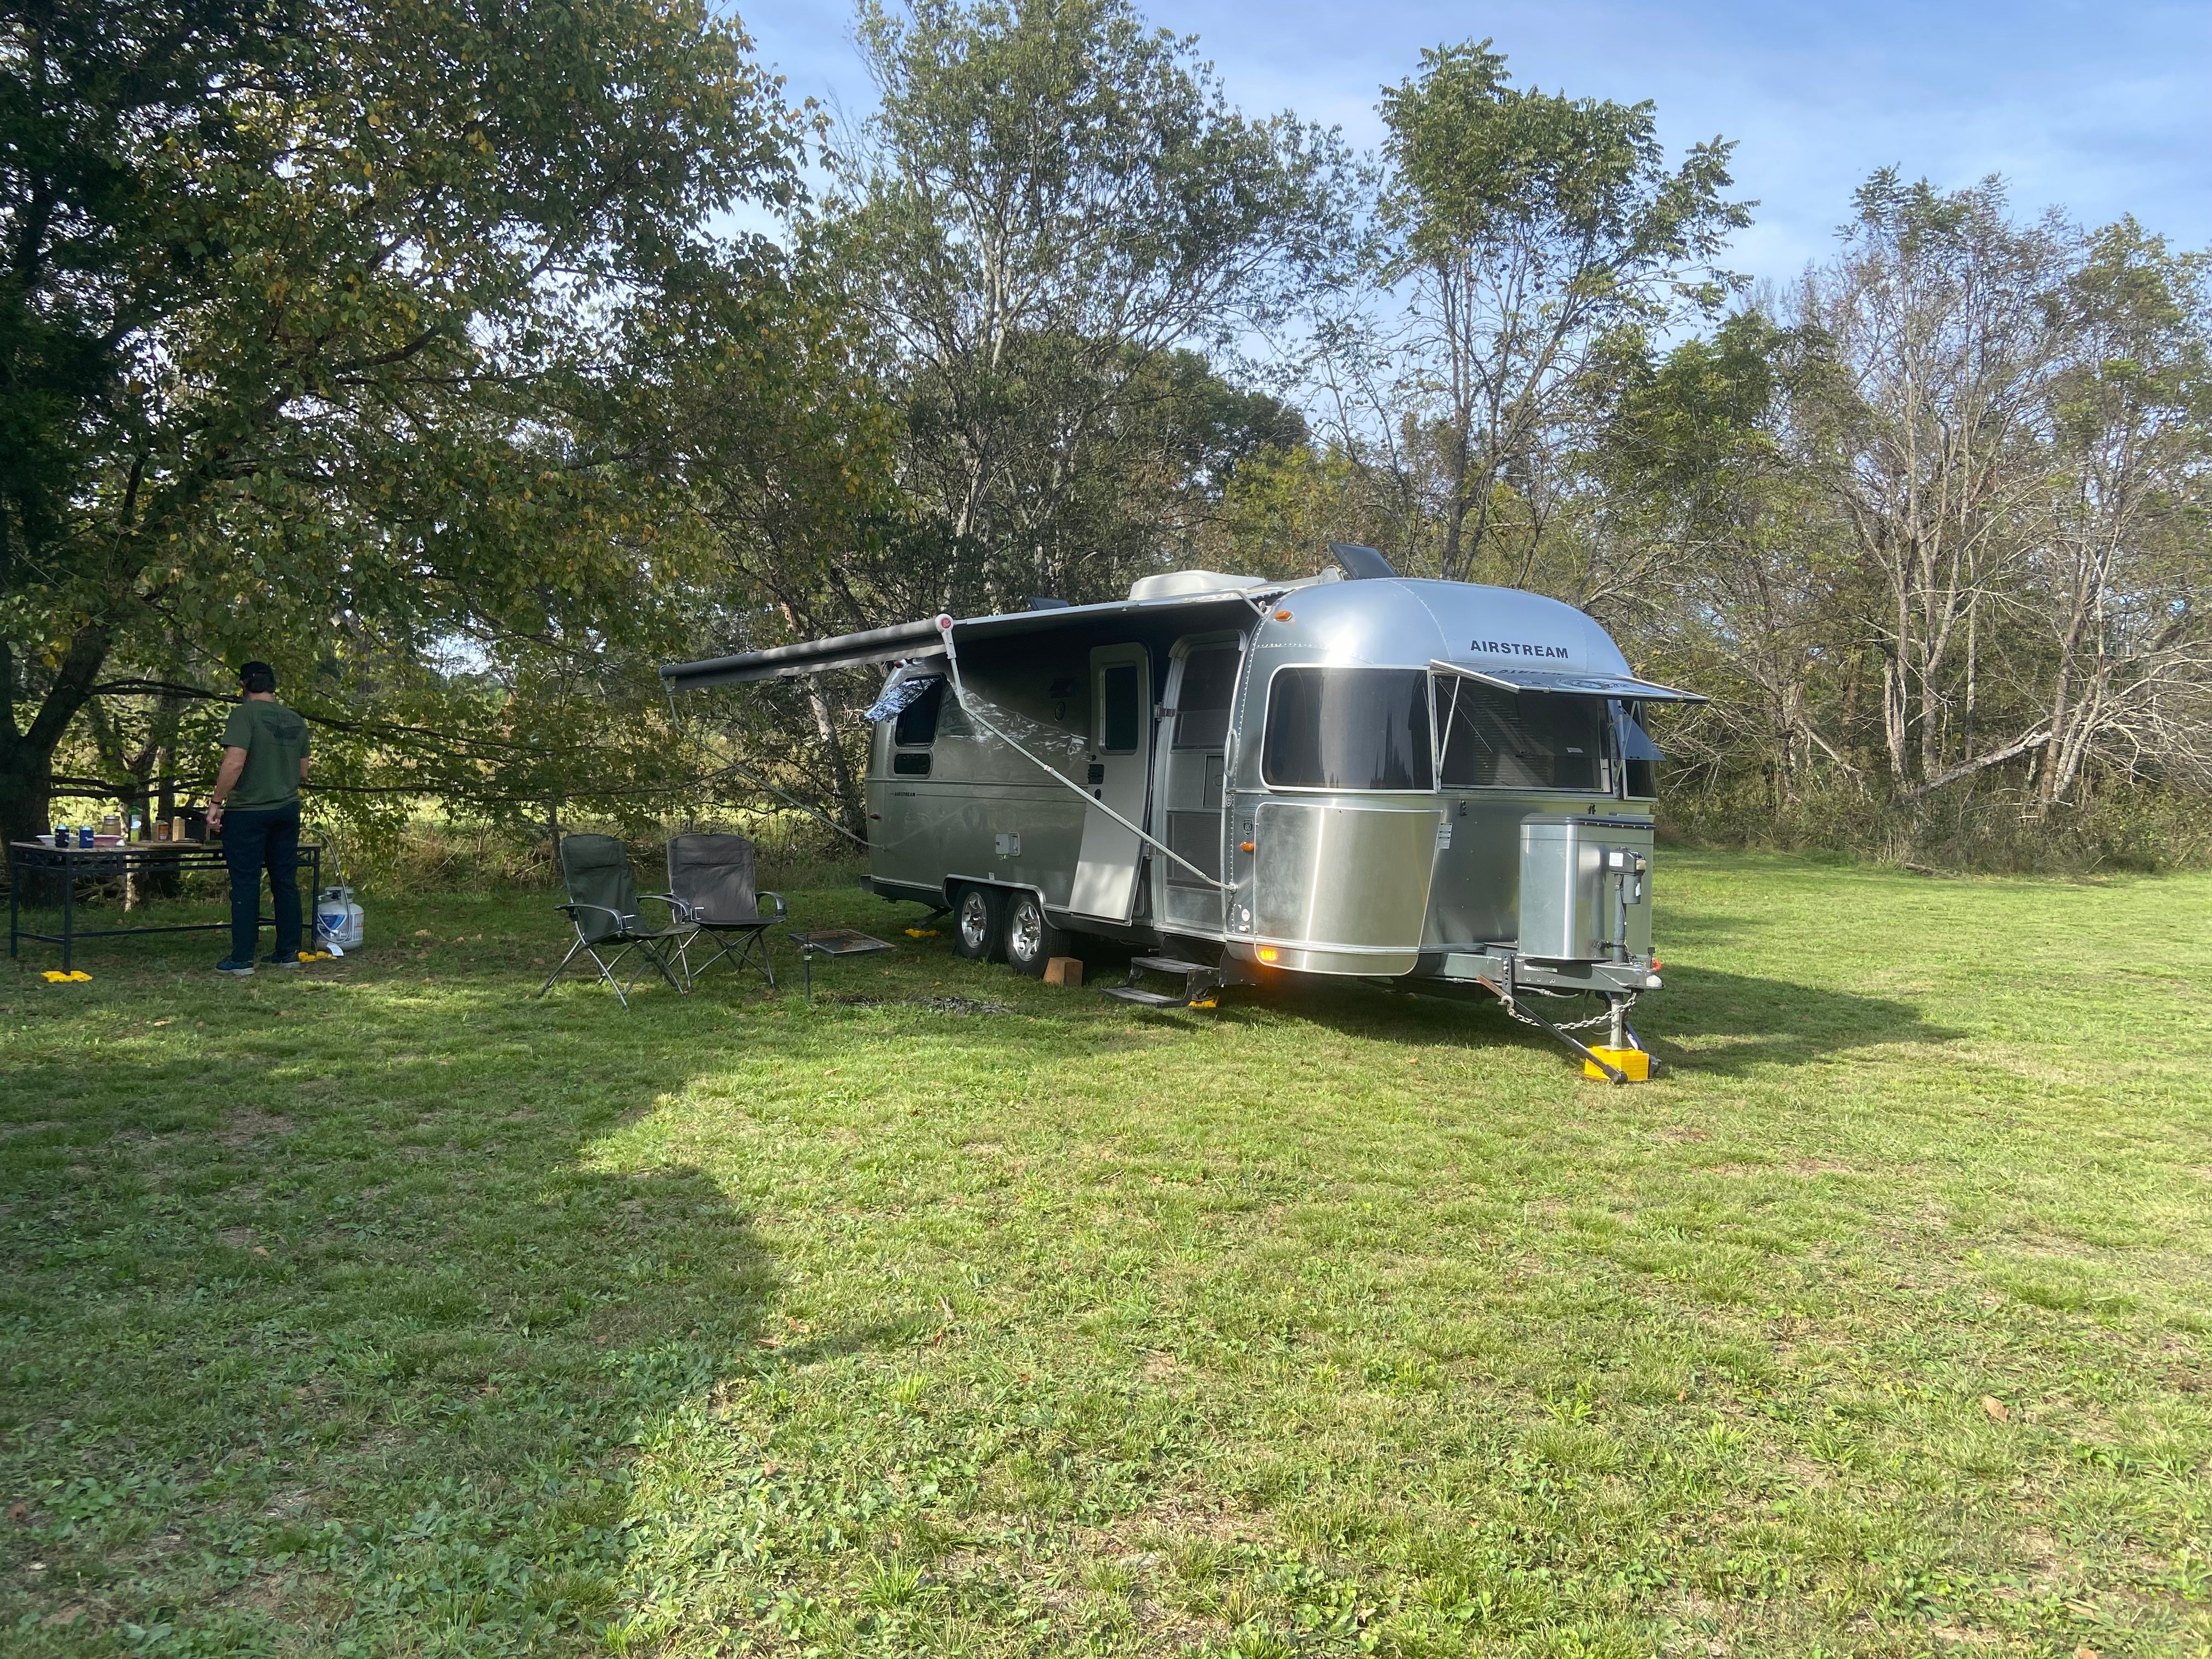 Camper submitted image from Furryfeathers Farm LLC - 1